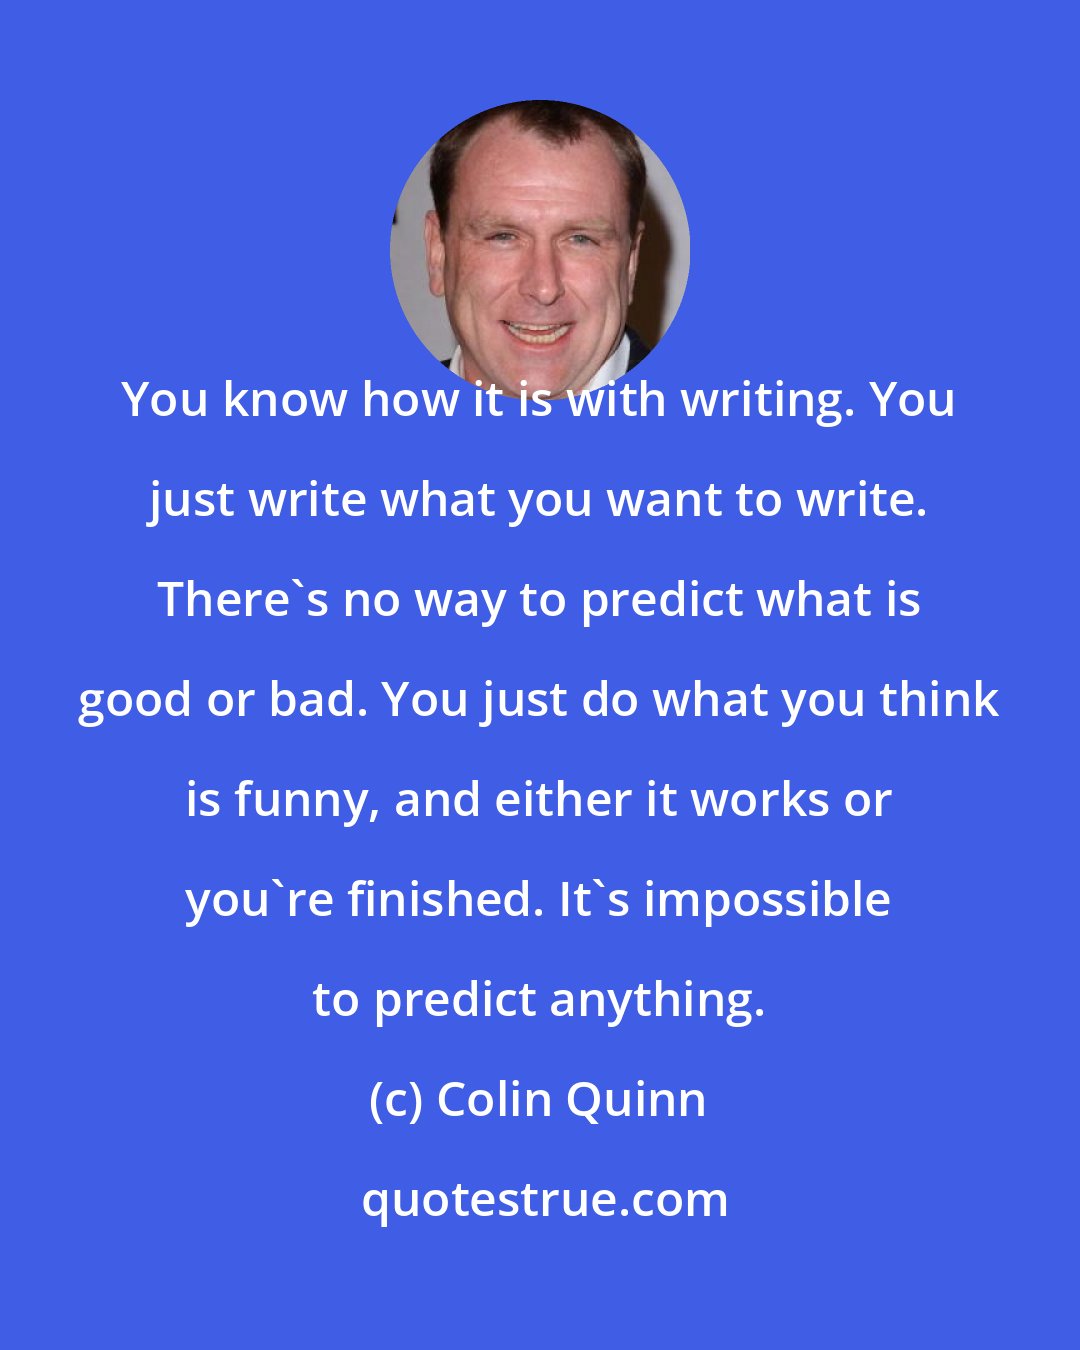 Colin Quinn: You know how it is with writing. You just write what you want to write. There's no way to predict what is good or bad. You just do what you think is funny, and either it works or you're finished. It's impossible to predict anything.